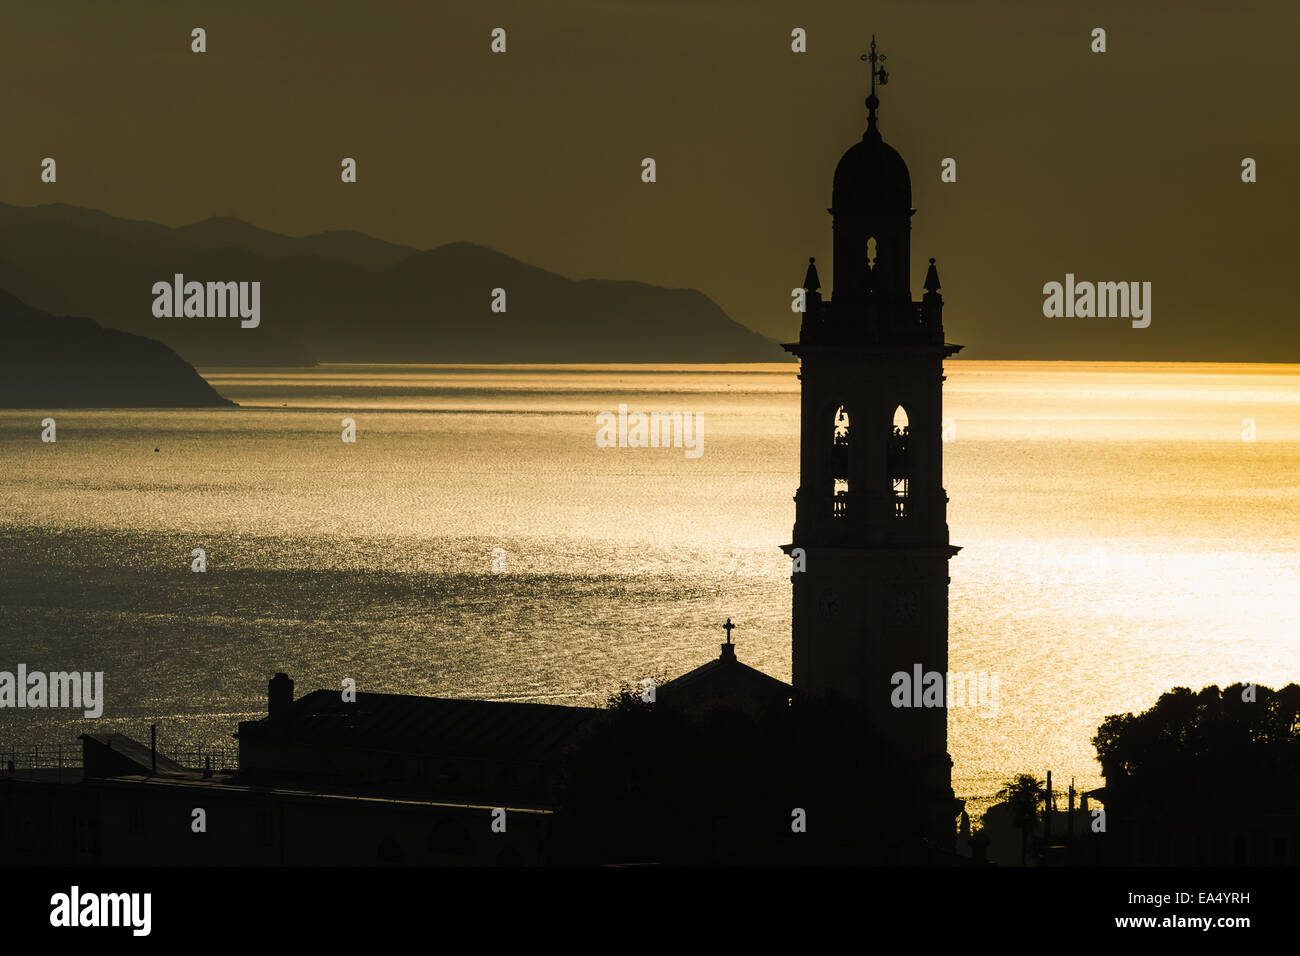 Golden sunlight reflected on water at dusk with tower of church; San Lorenzo della Costa, Liguria, Italy Stock Photo